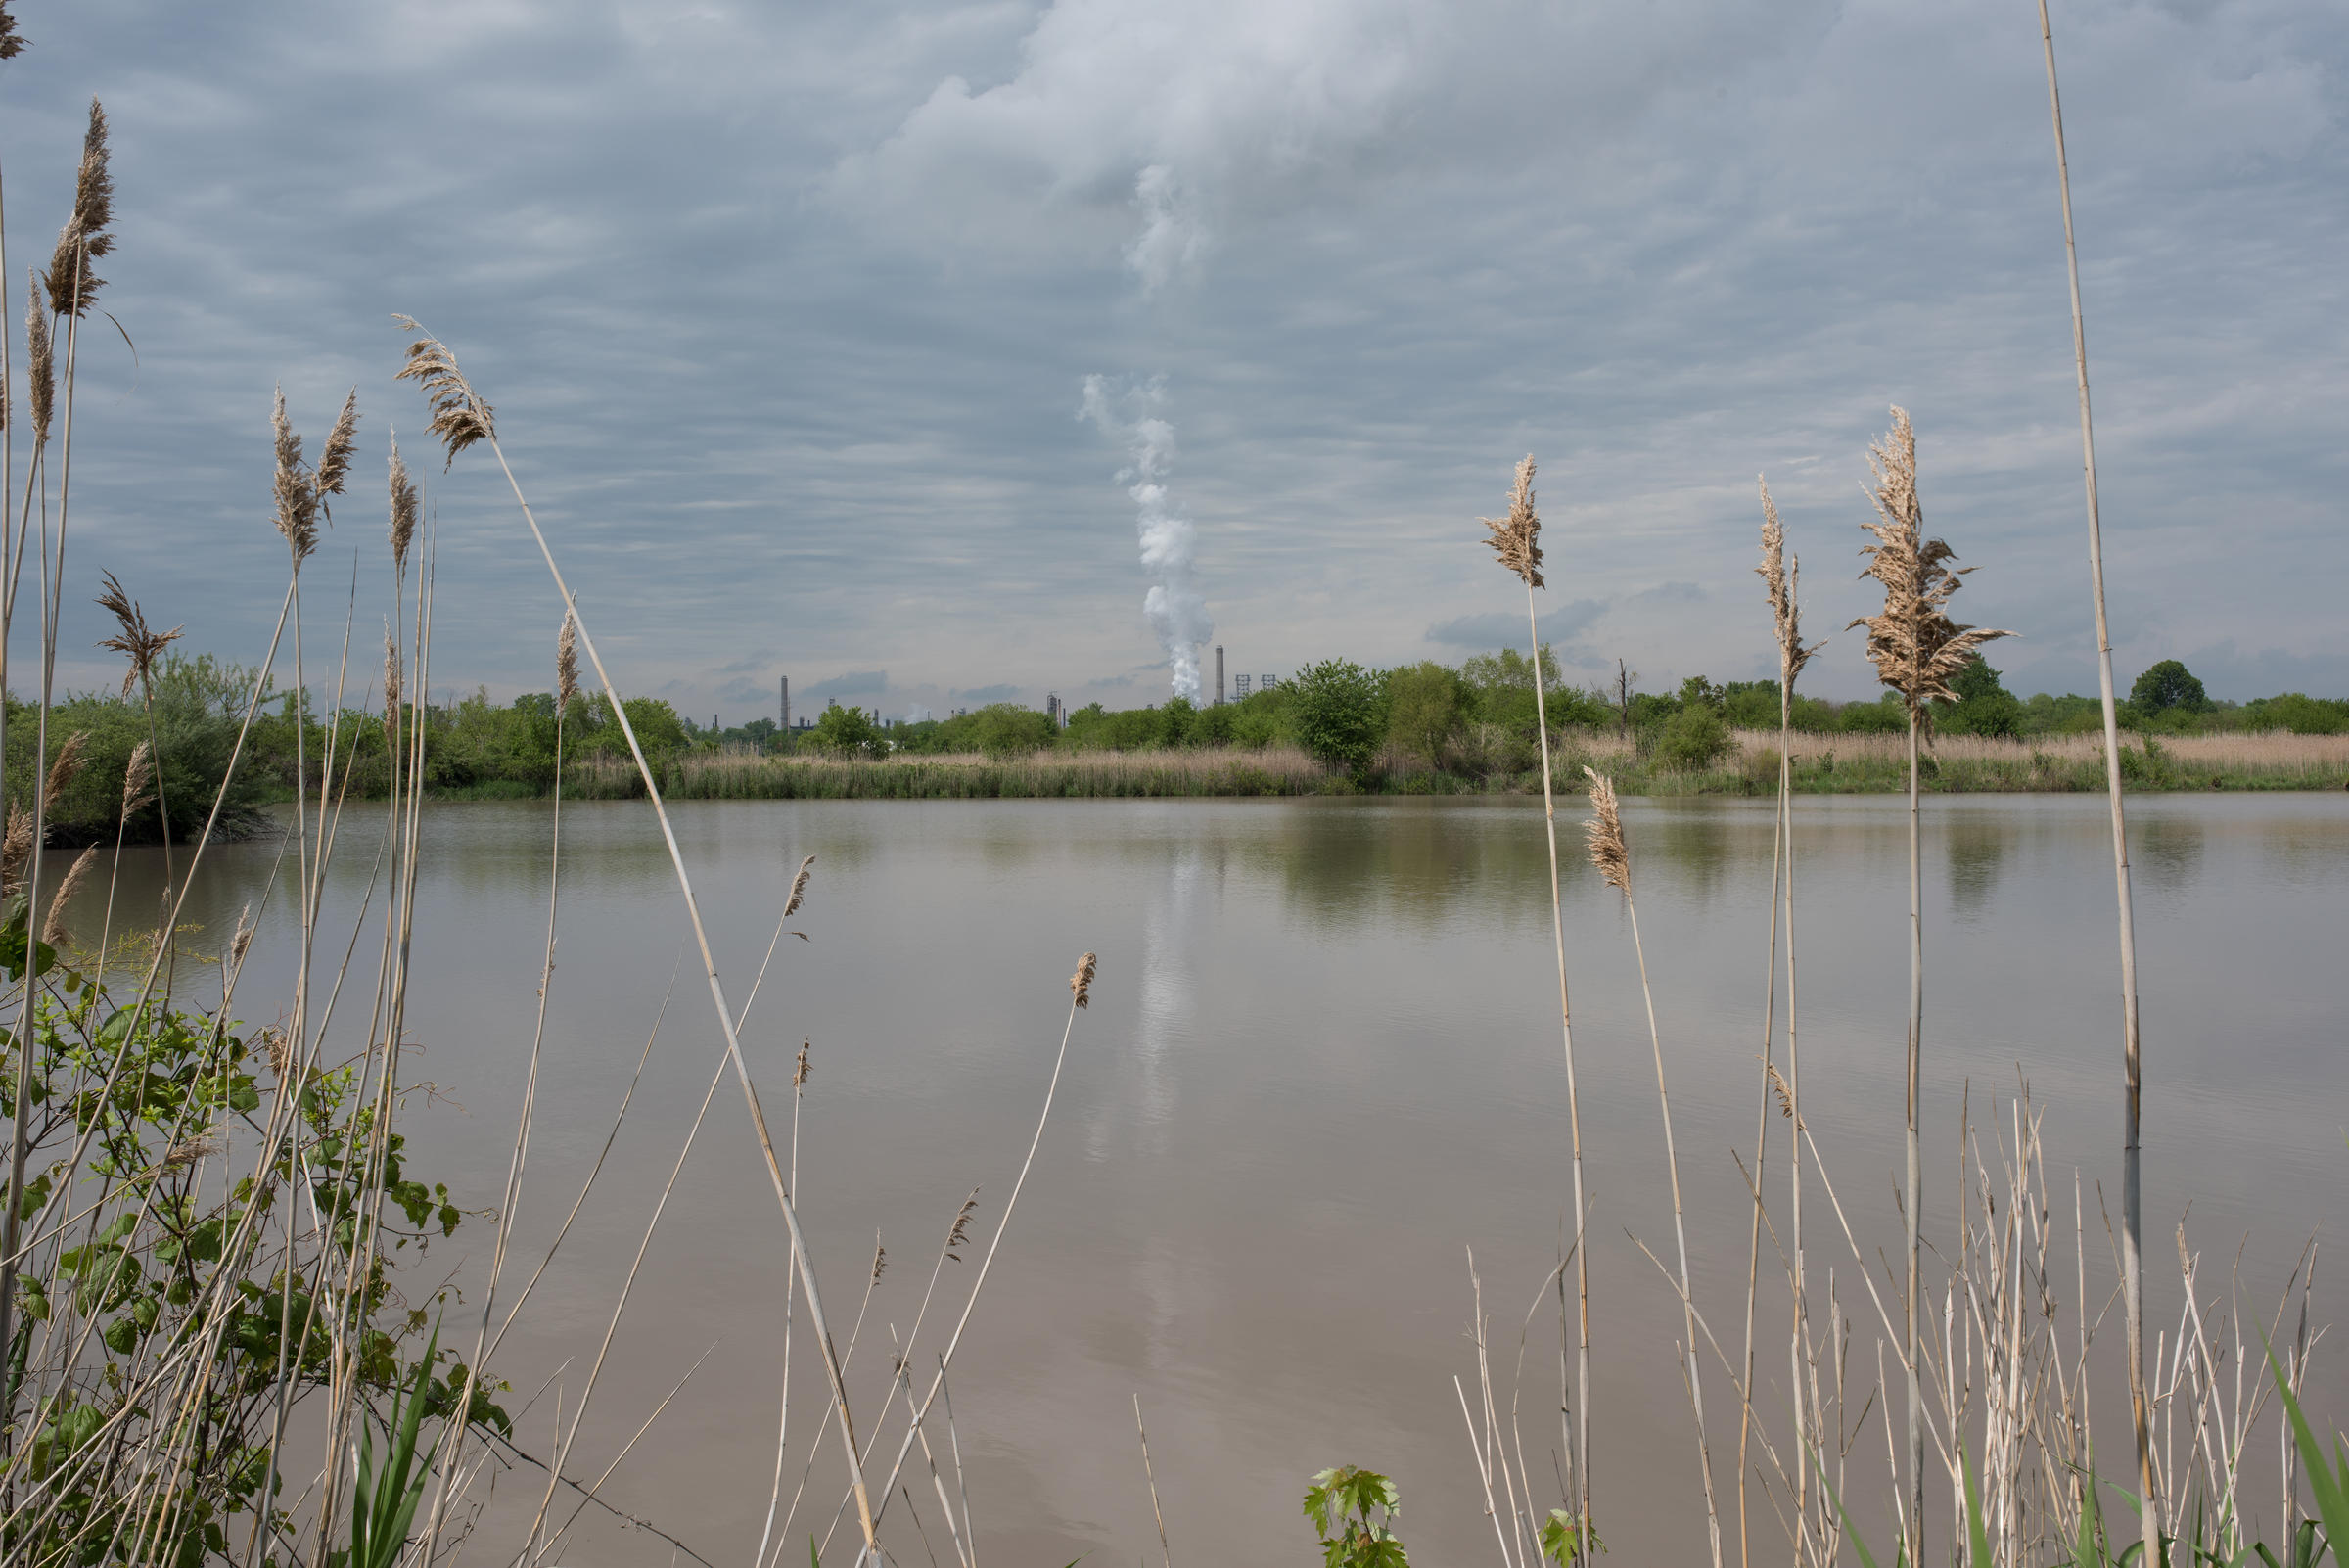 Interactive project will let users explore the St. Louis flood plain online and on foot | St ...